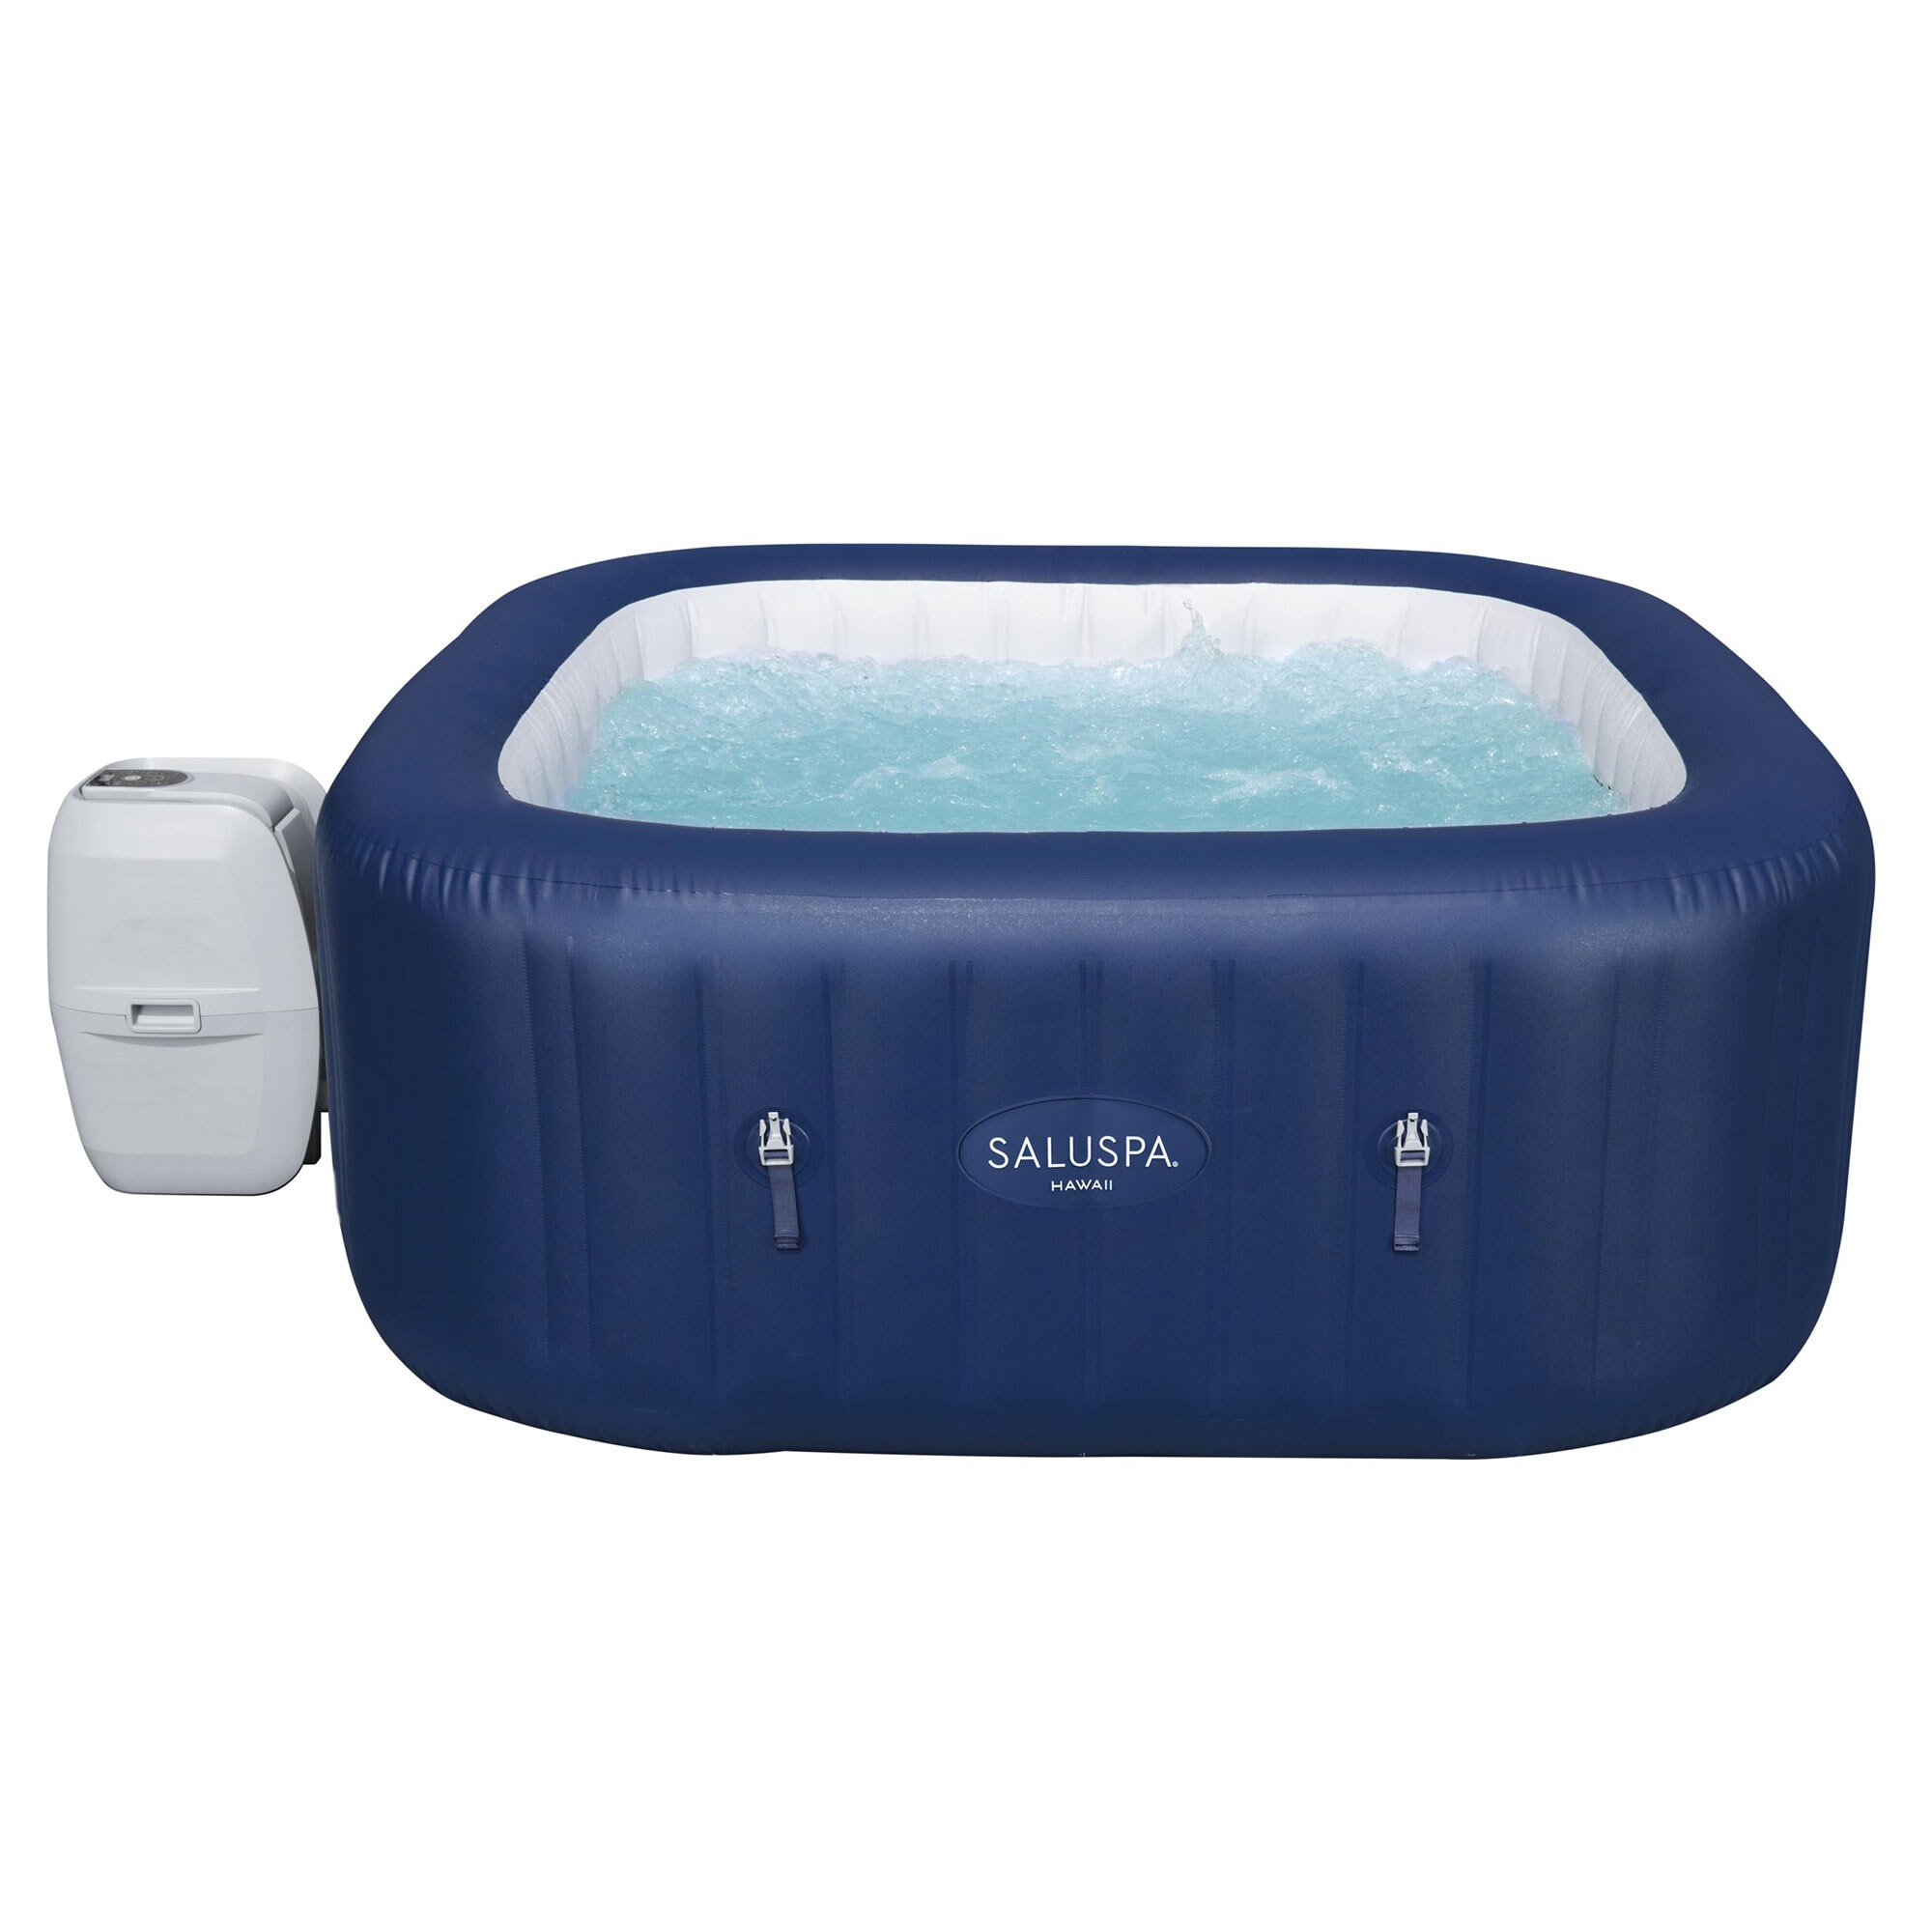 6-Person Inflatable Square Hot Tub in the Tubs & department at Lowes.com